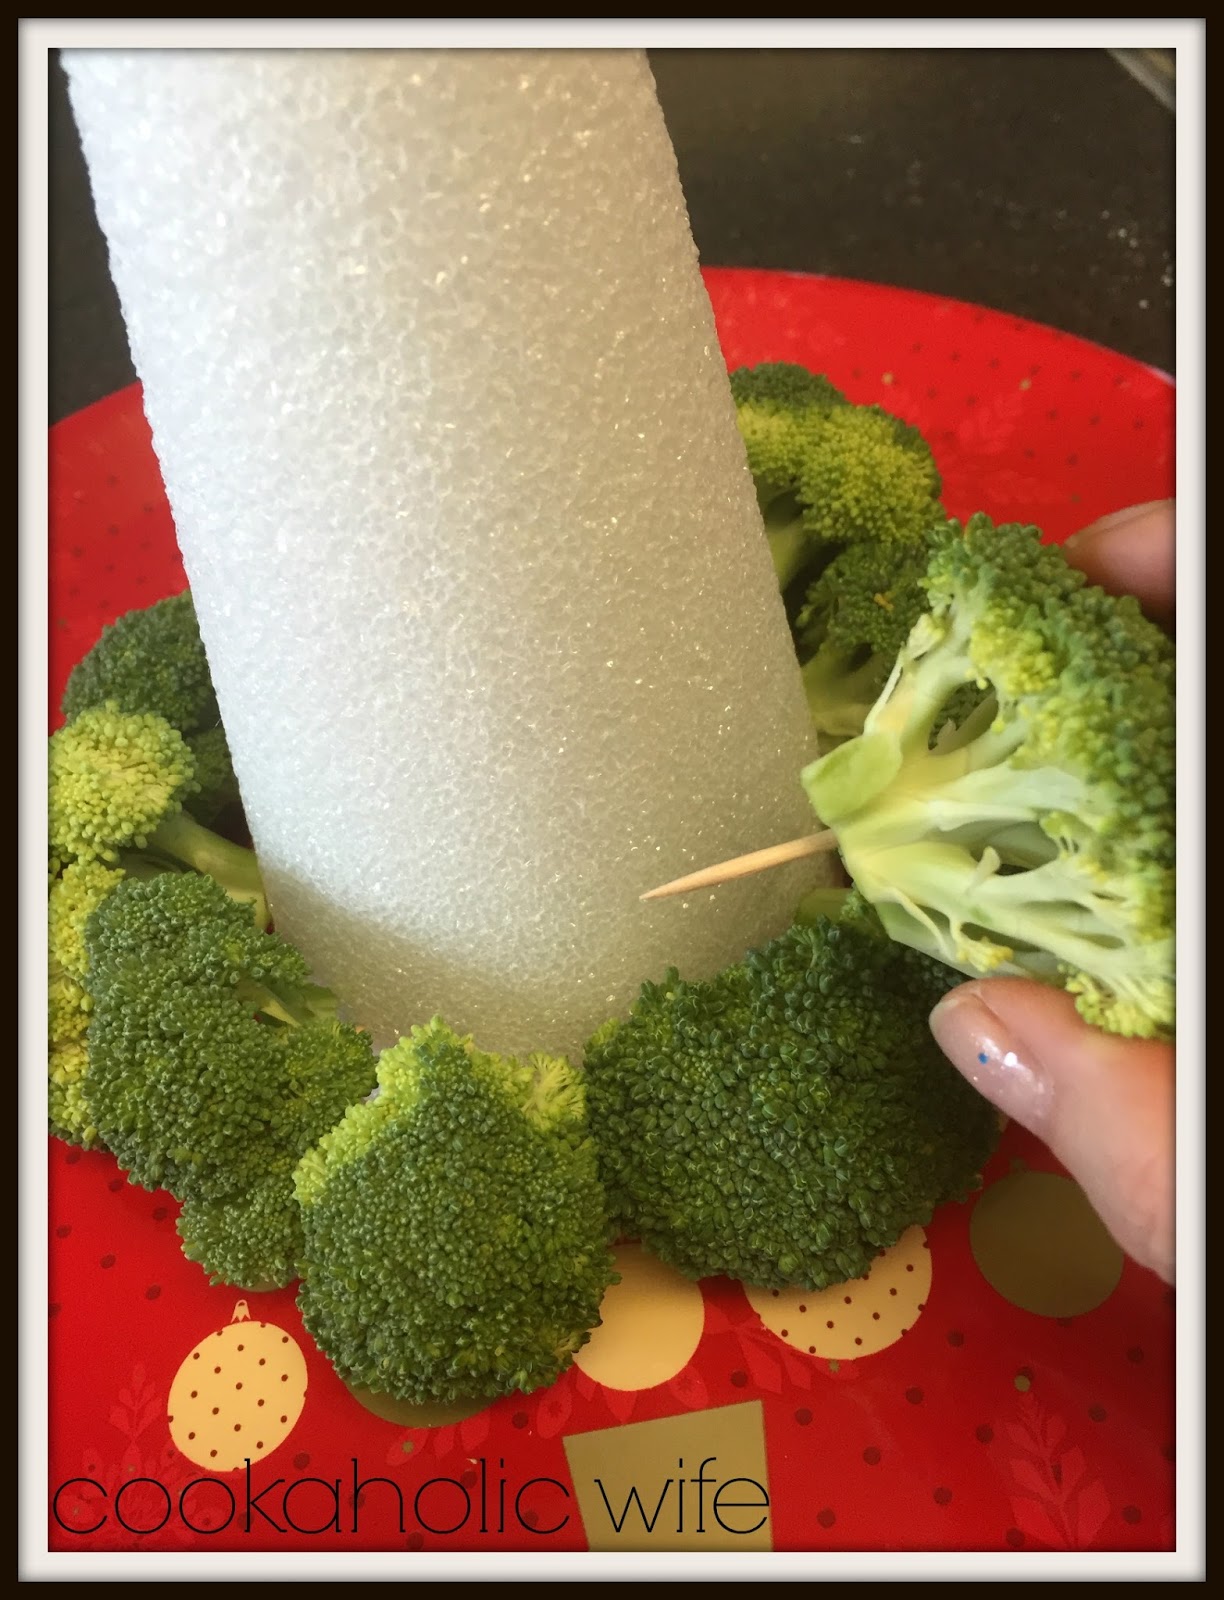 Vegetable Christmas Tree (a styrofoam cone is under it, romaine